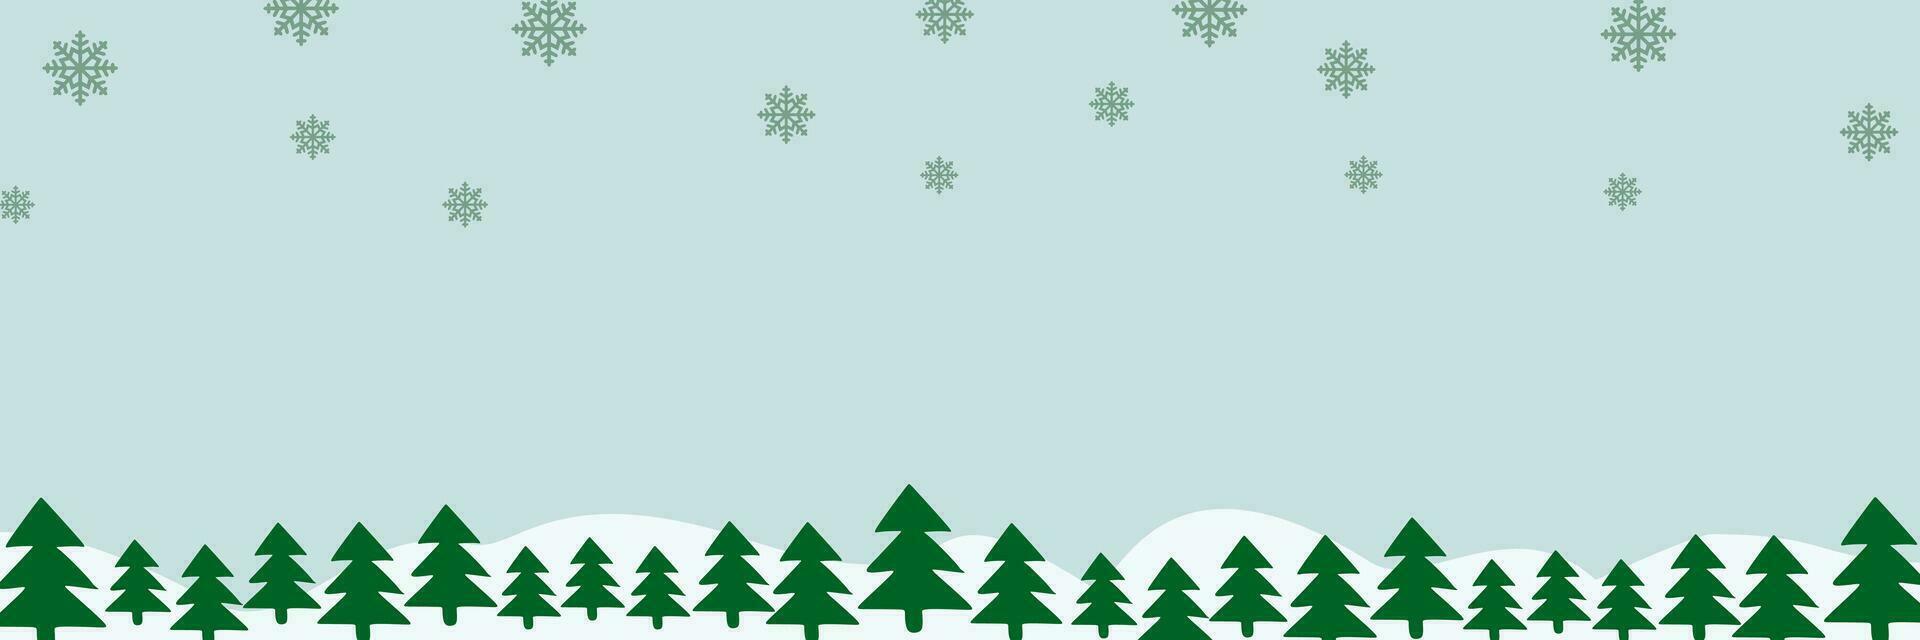 Border with green fir trees, falling snowflakes, snowdrifts with Copyspace for text. Pine, xmas evergreen plants banner. Vector Christmas tree garland and snow drifts pattern. Flat background.